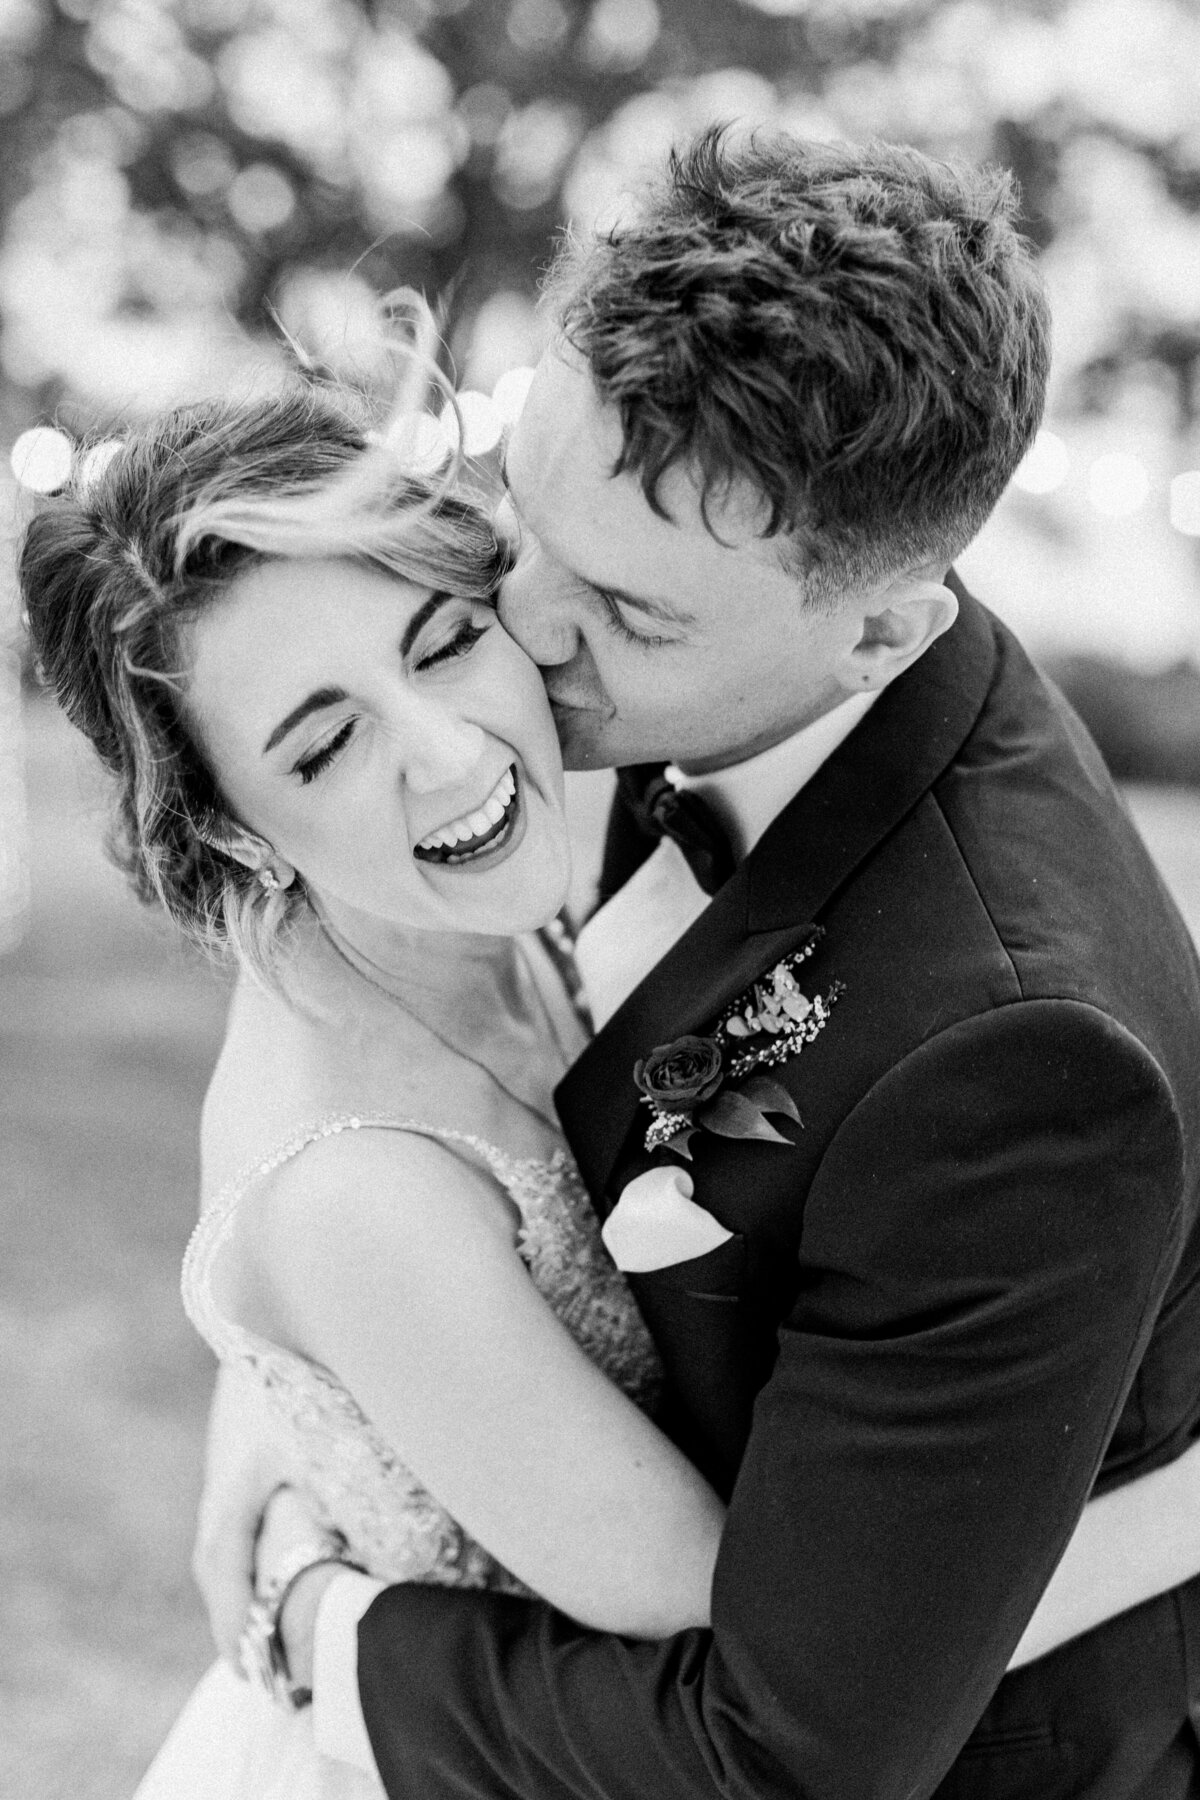 Houston Texas giggling bride and groom